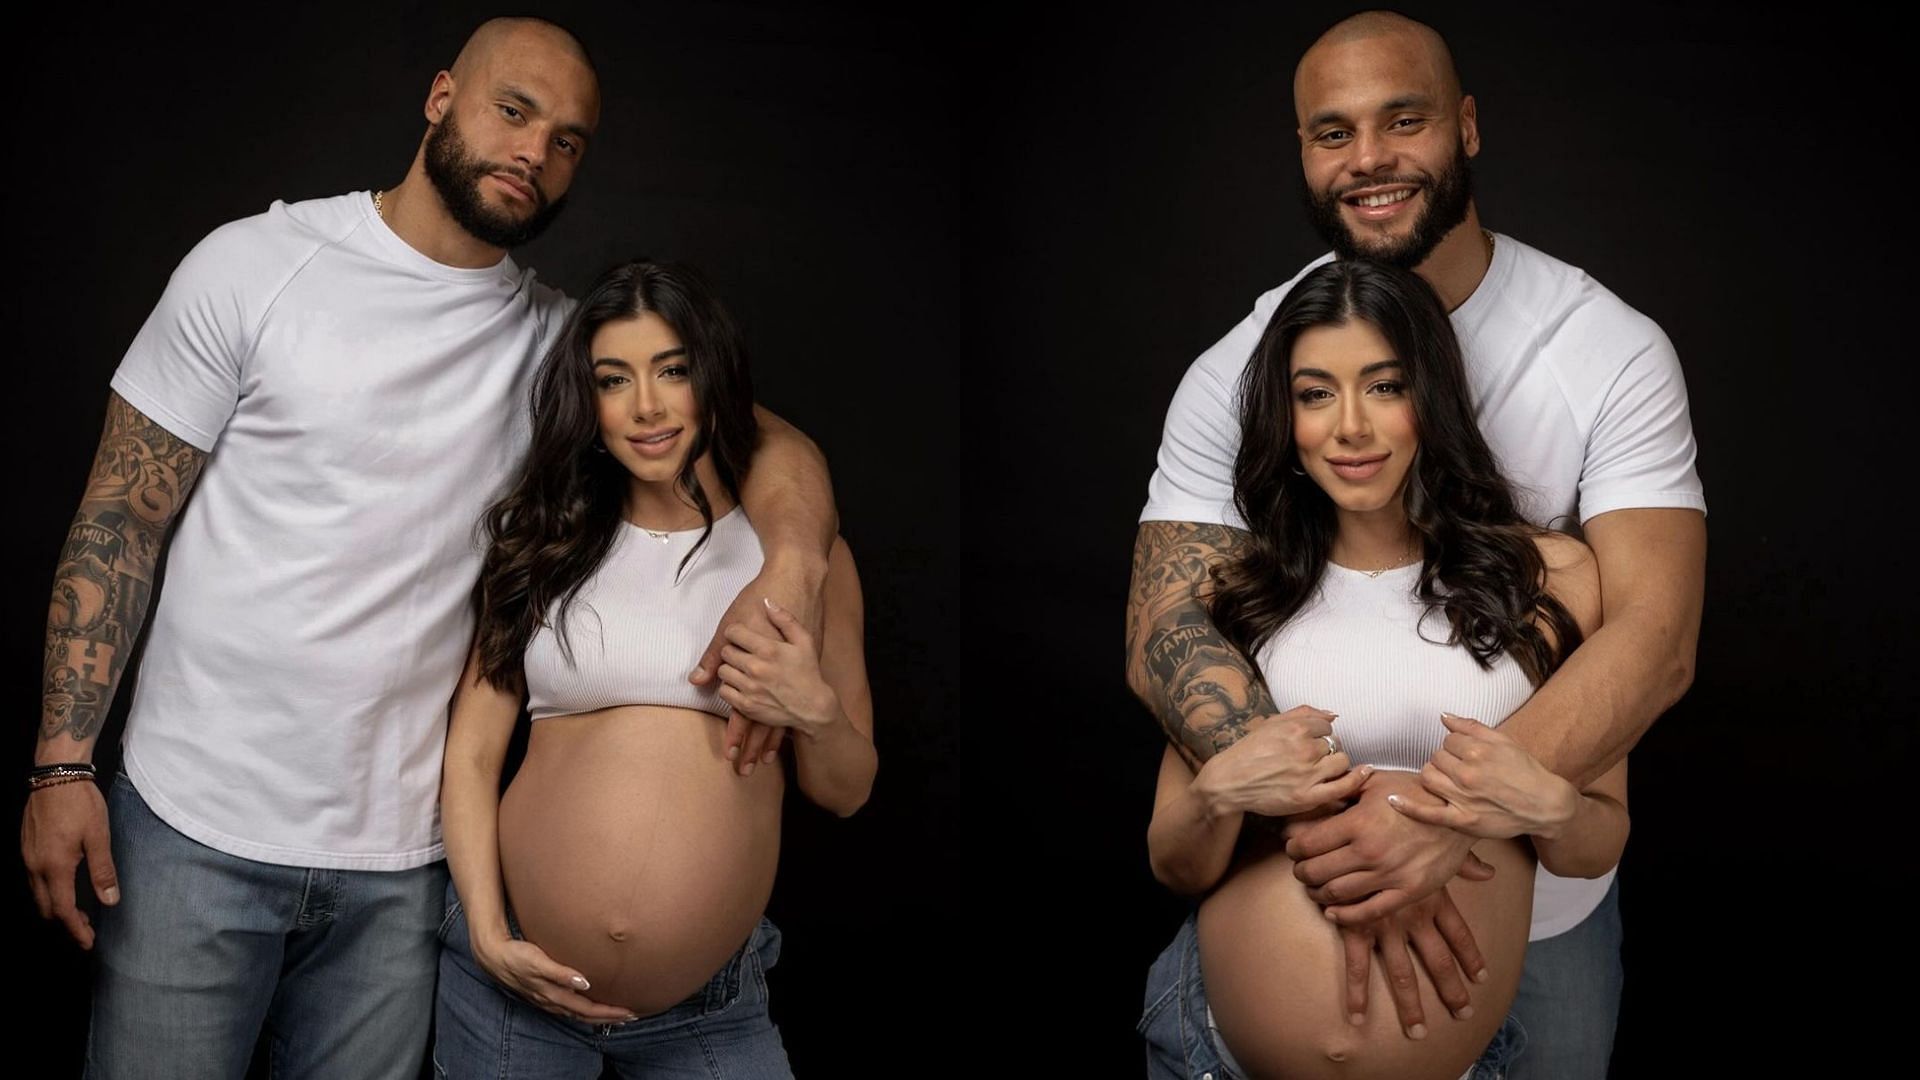 IN PHOTOS: Dak Prescott poses with Sarah Jane for wholesome pregnancy shoot  as baby's due date nears